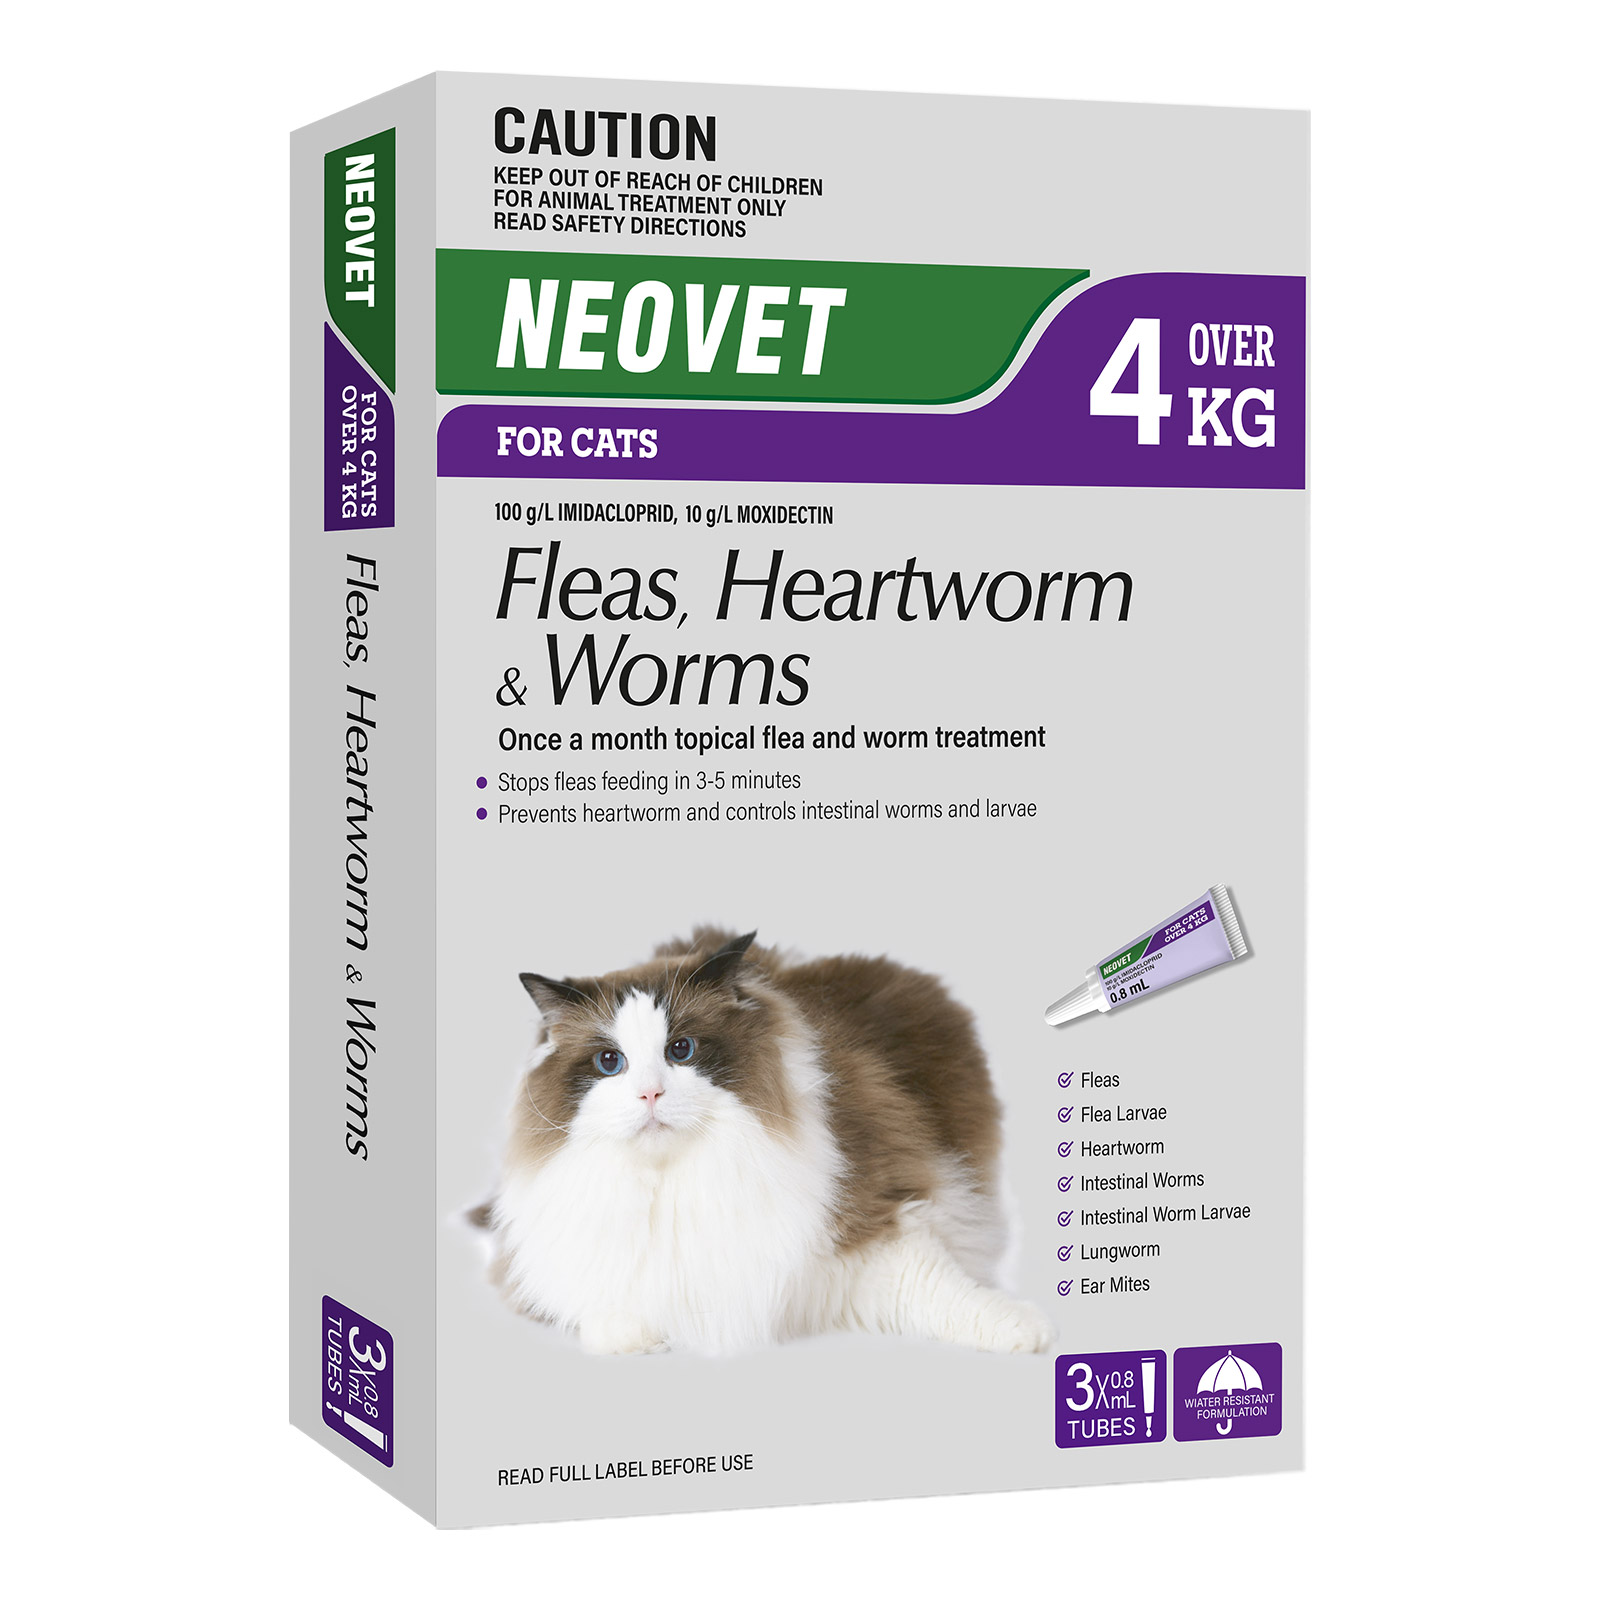 Neovet Spot-On For Large Cats Over 8.8lbs (Purple) 6 Pipettes
